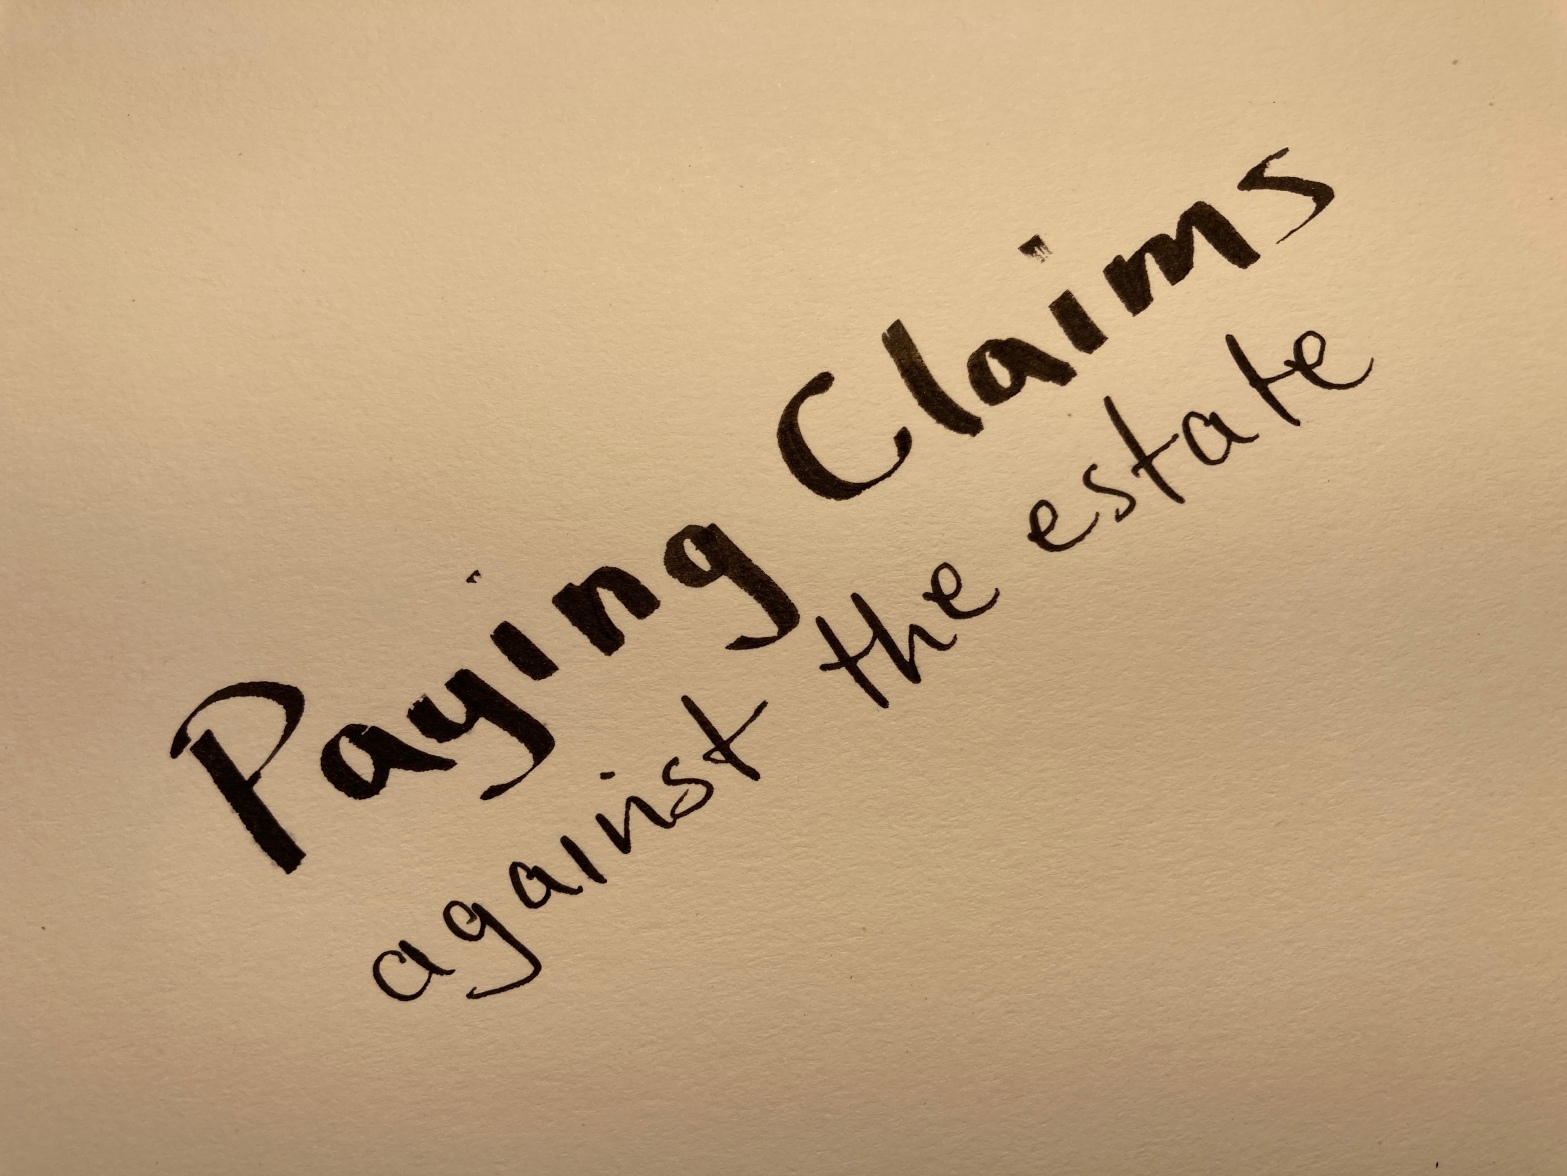 Paying claims against the estate